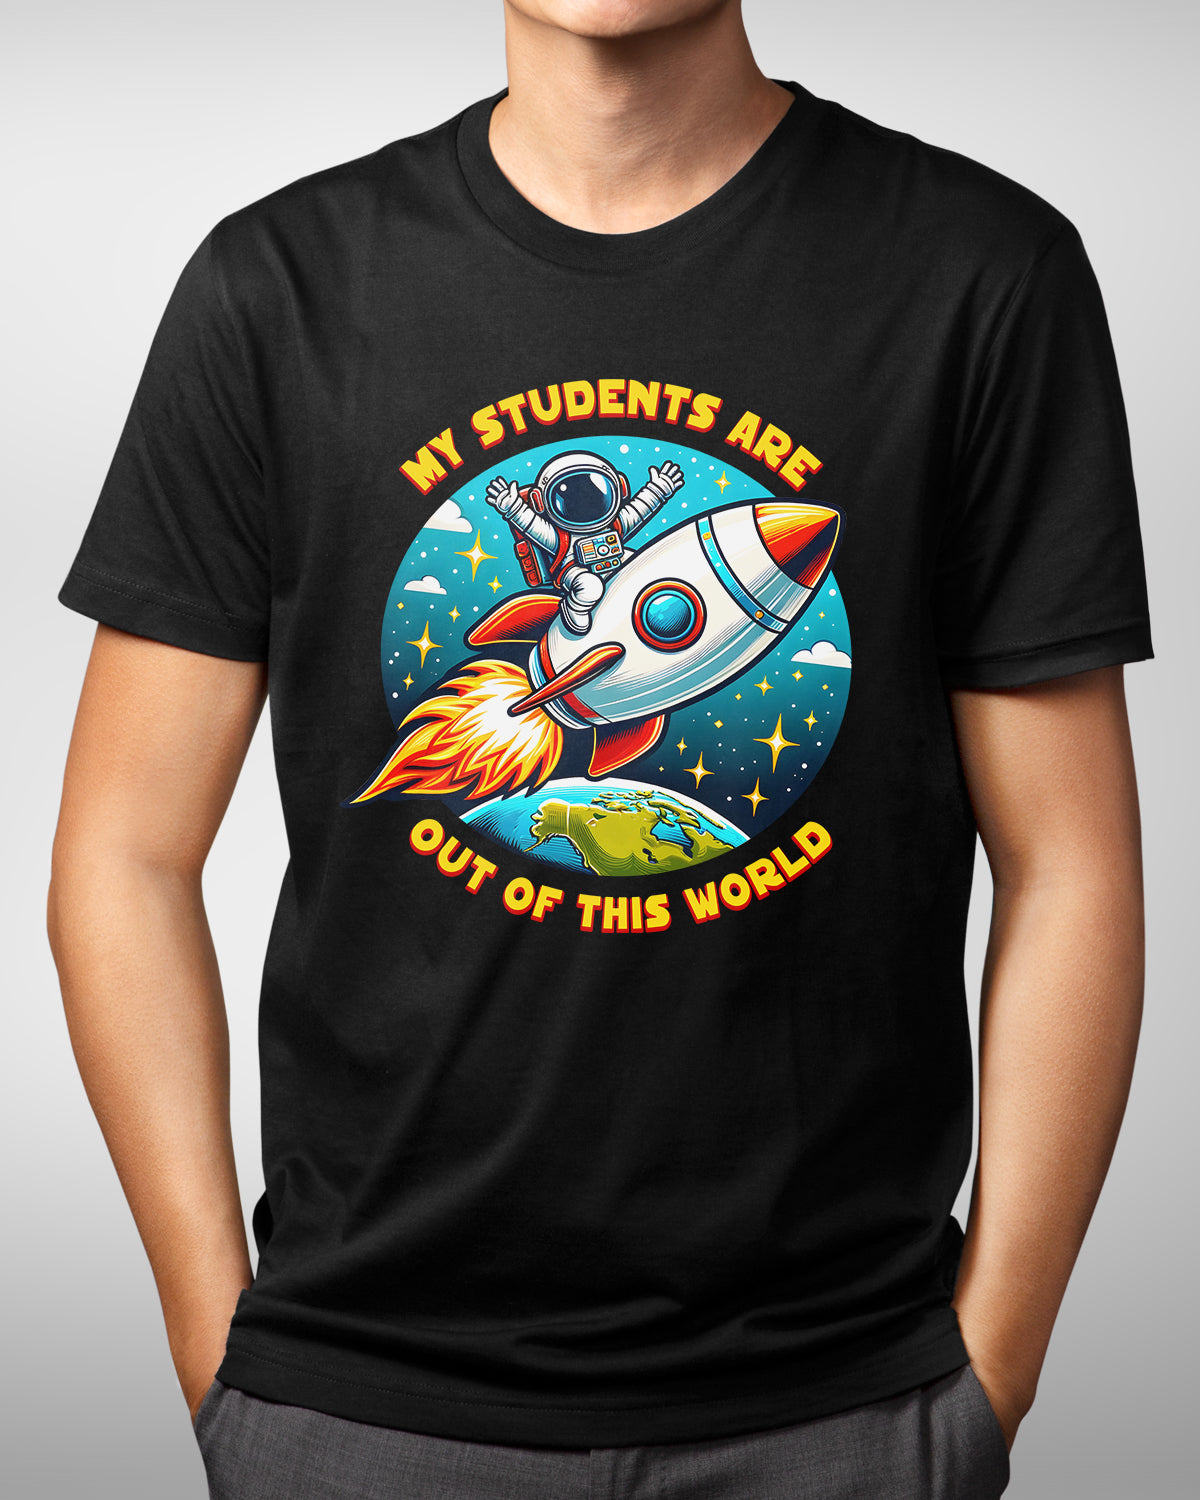 My Students Are Out of This World Funny School Tee, Teacher Appreciation Rocket T-Shirt, Cute Space Gift for Teachers